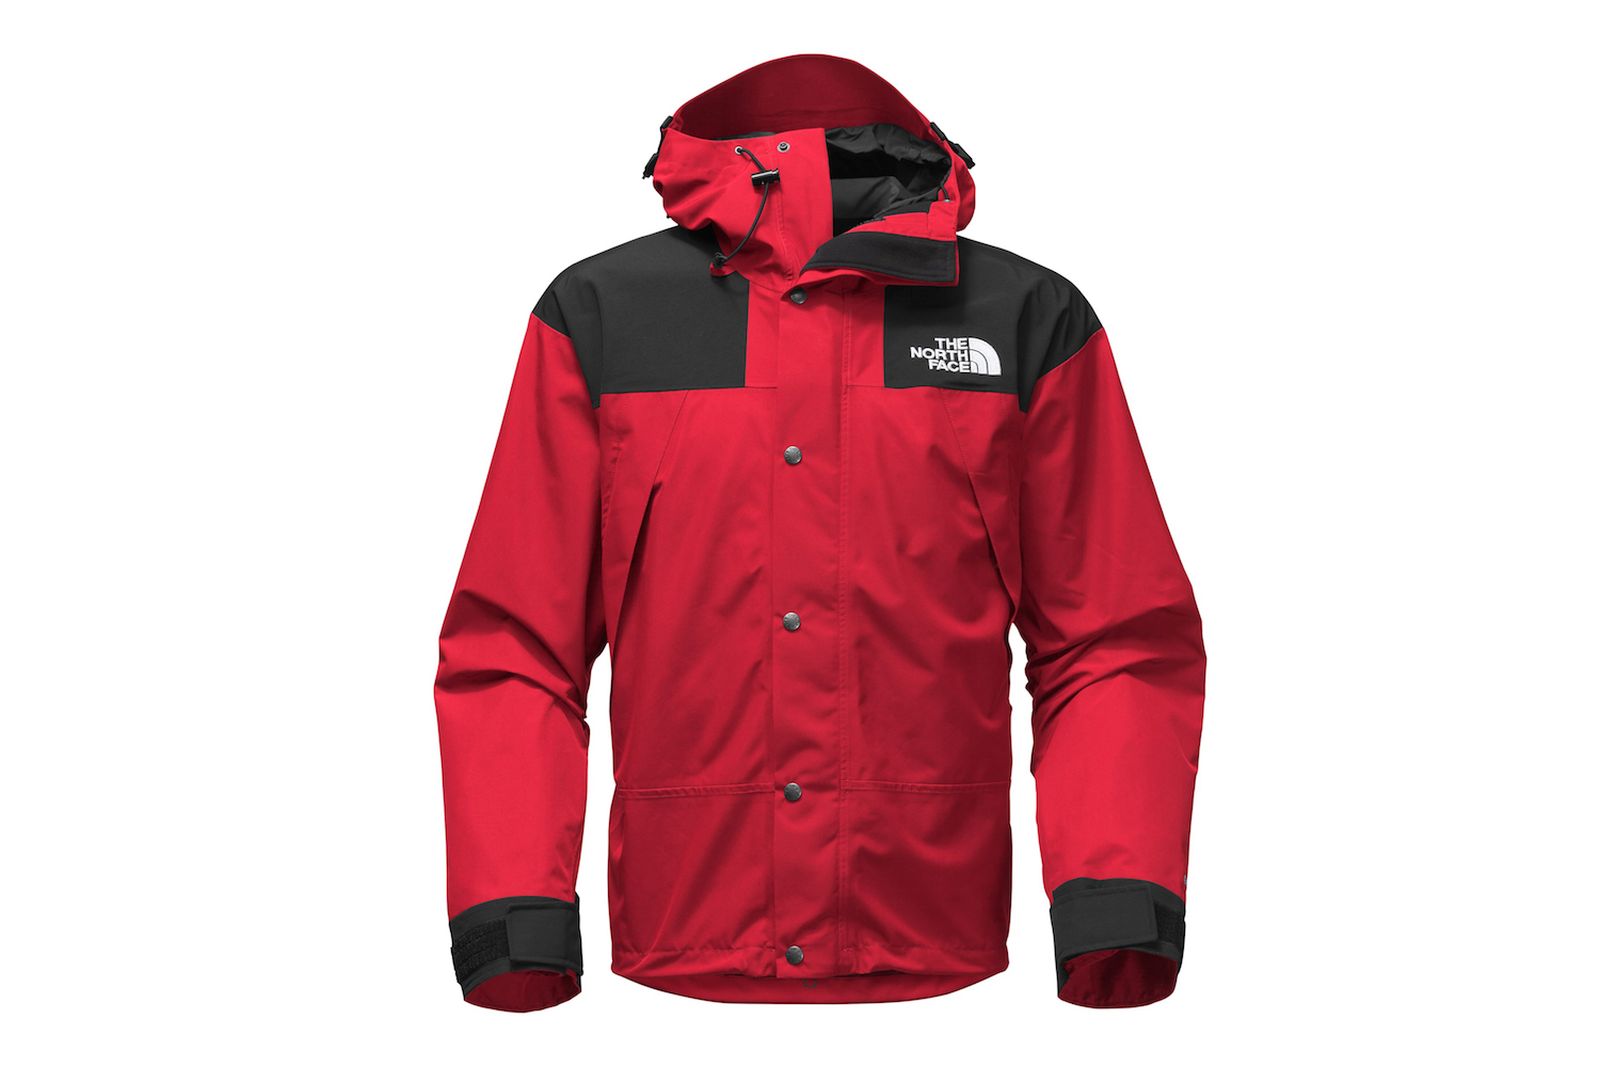 The North Face Retros Its Iconic 1990 Mountain Jacket